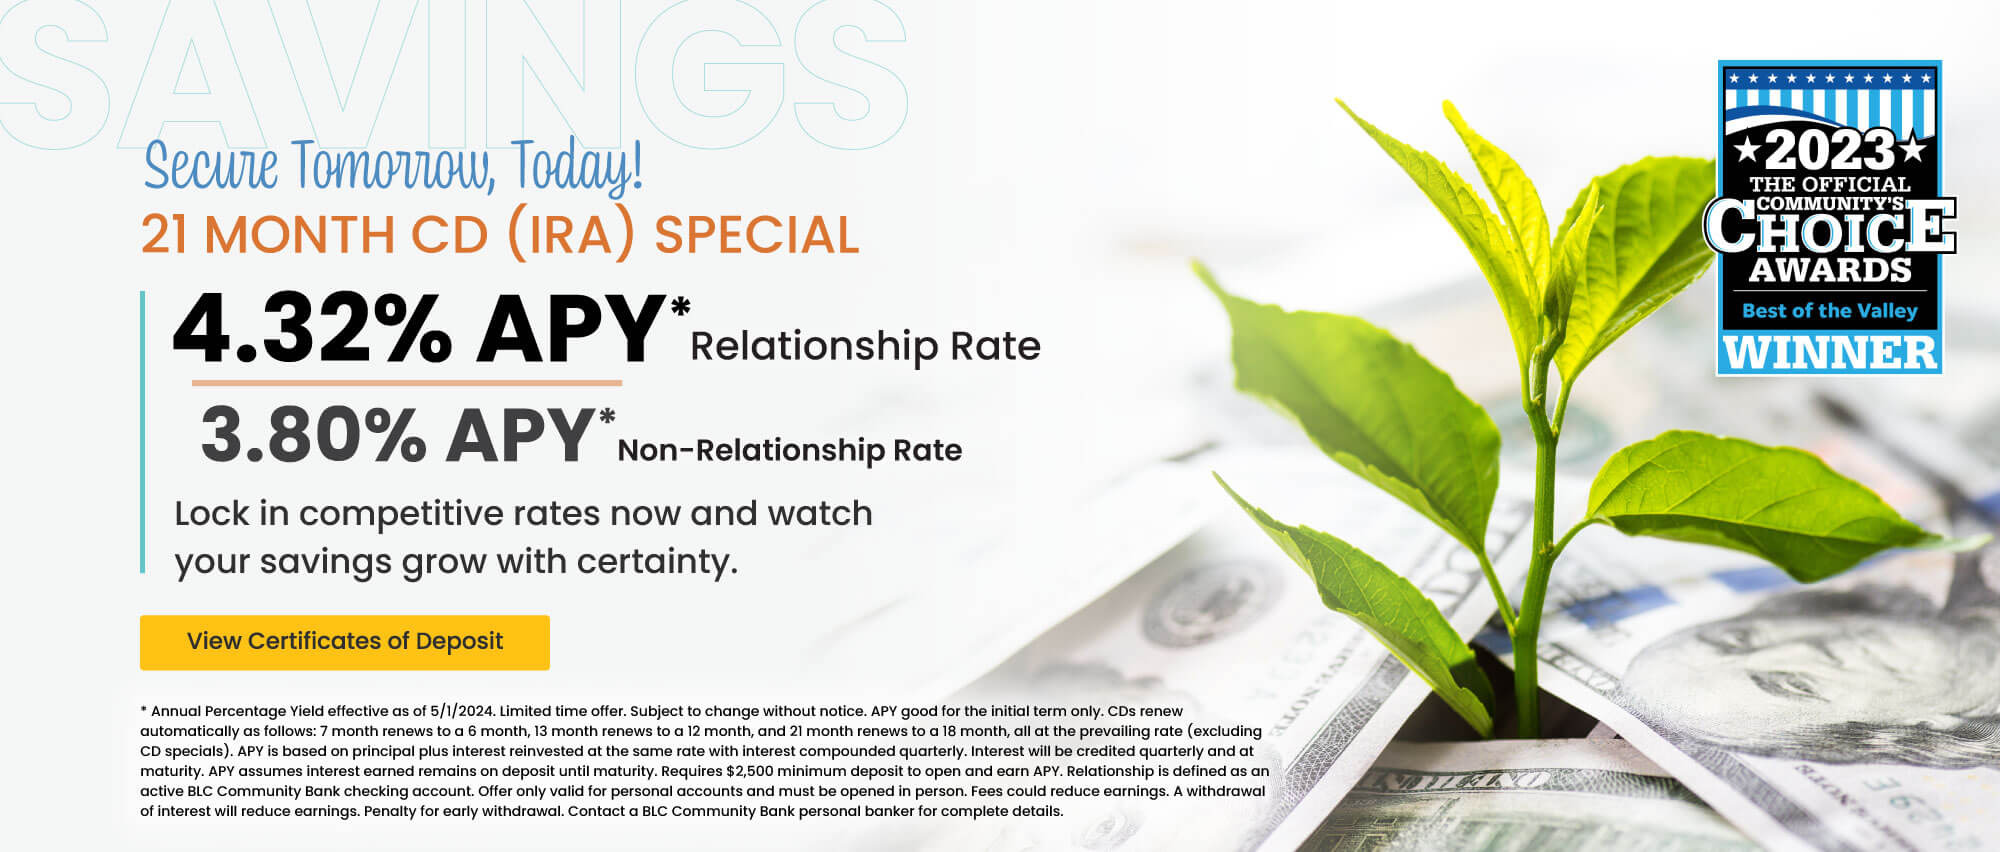 Secure Tomorrow, Today! 21 month CD (IRA) 4.32% APY* relationship rate 3.80% apy* non-relationship rate.  Click here to view certificates of deposit for details.